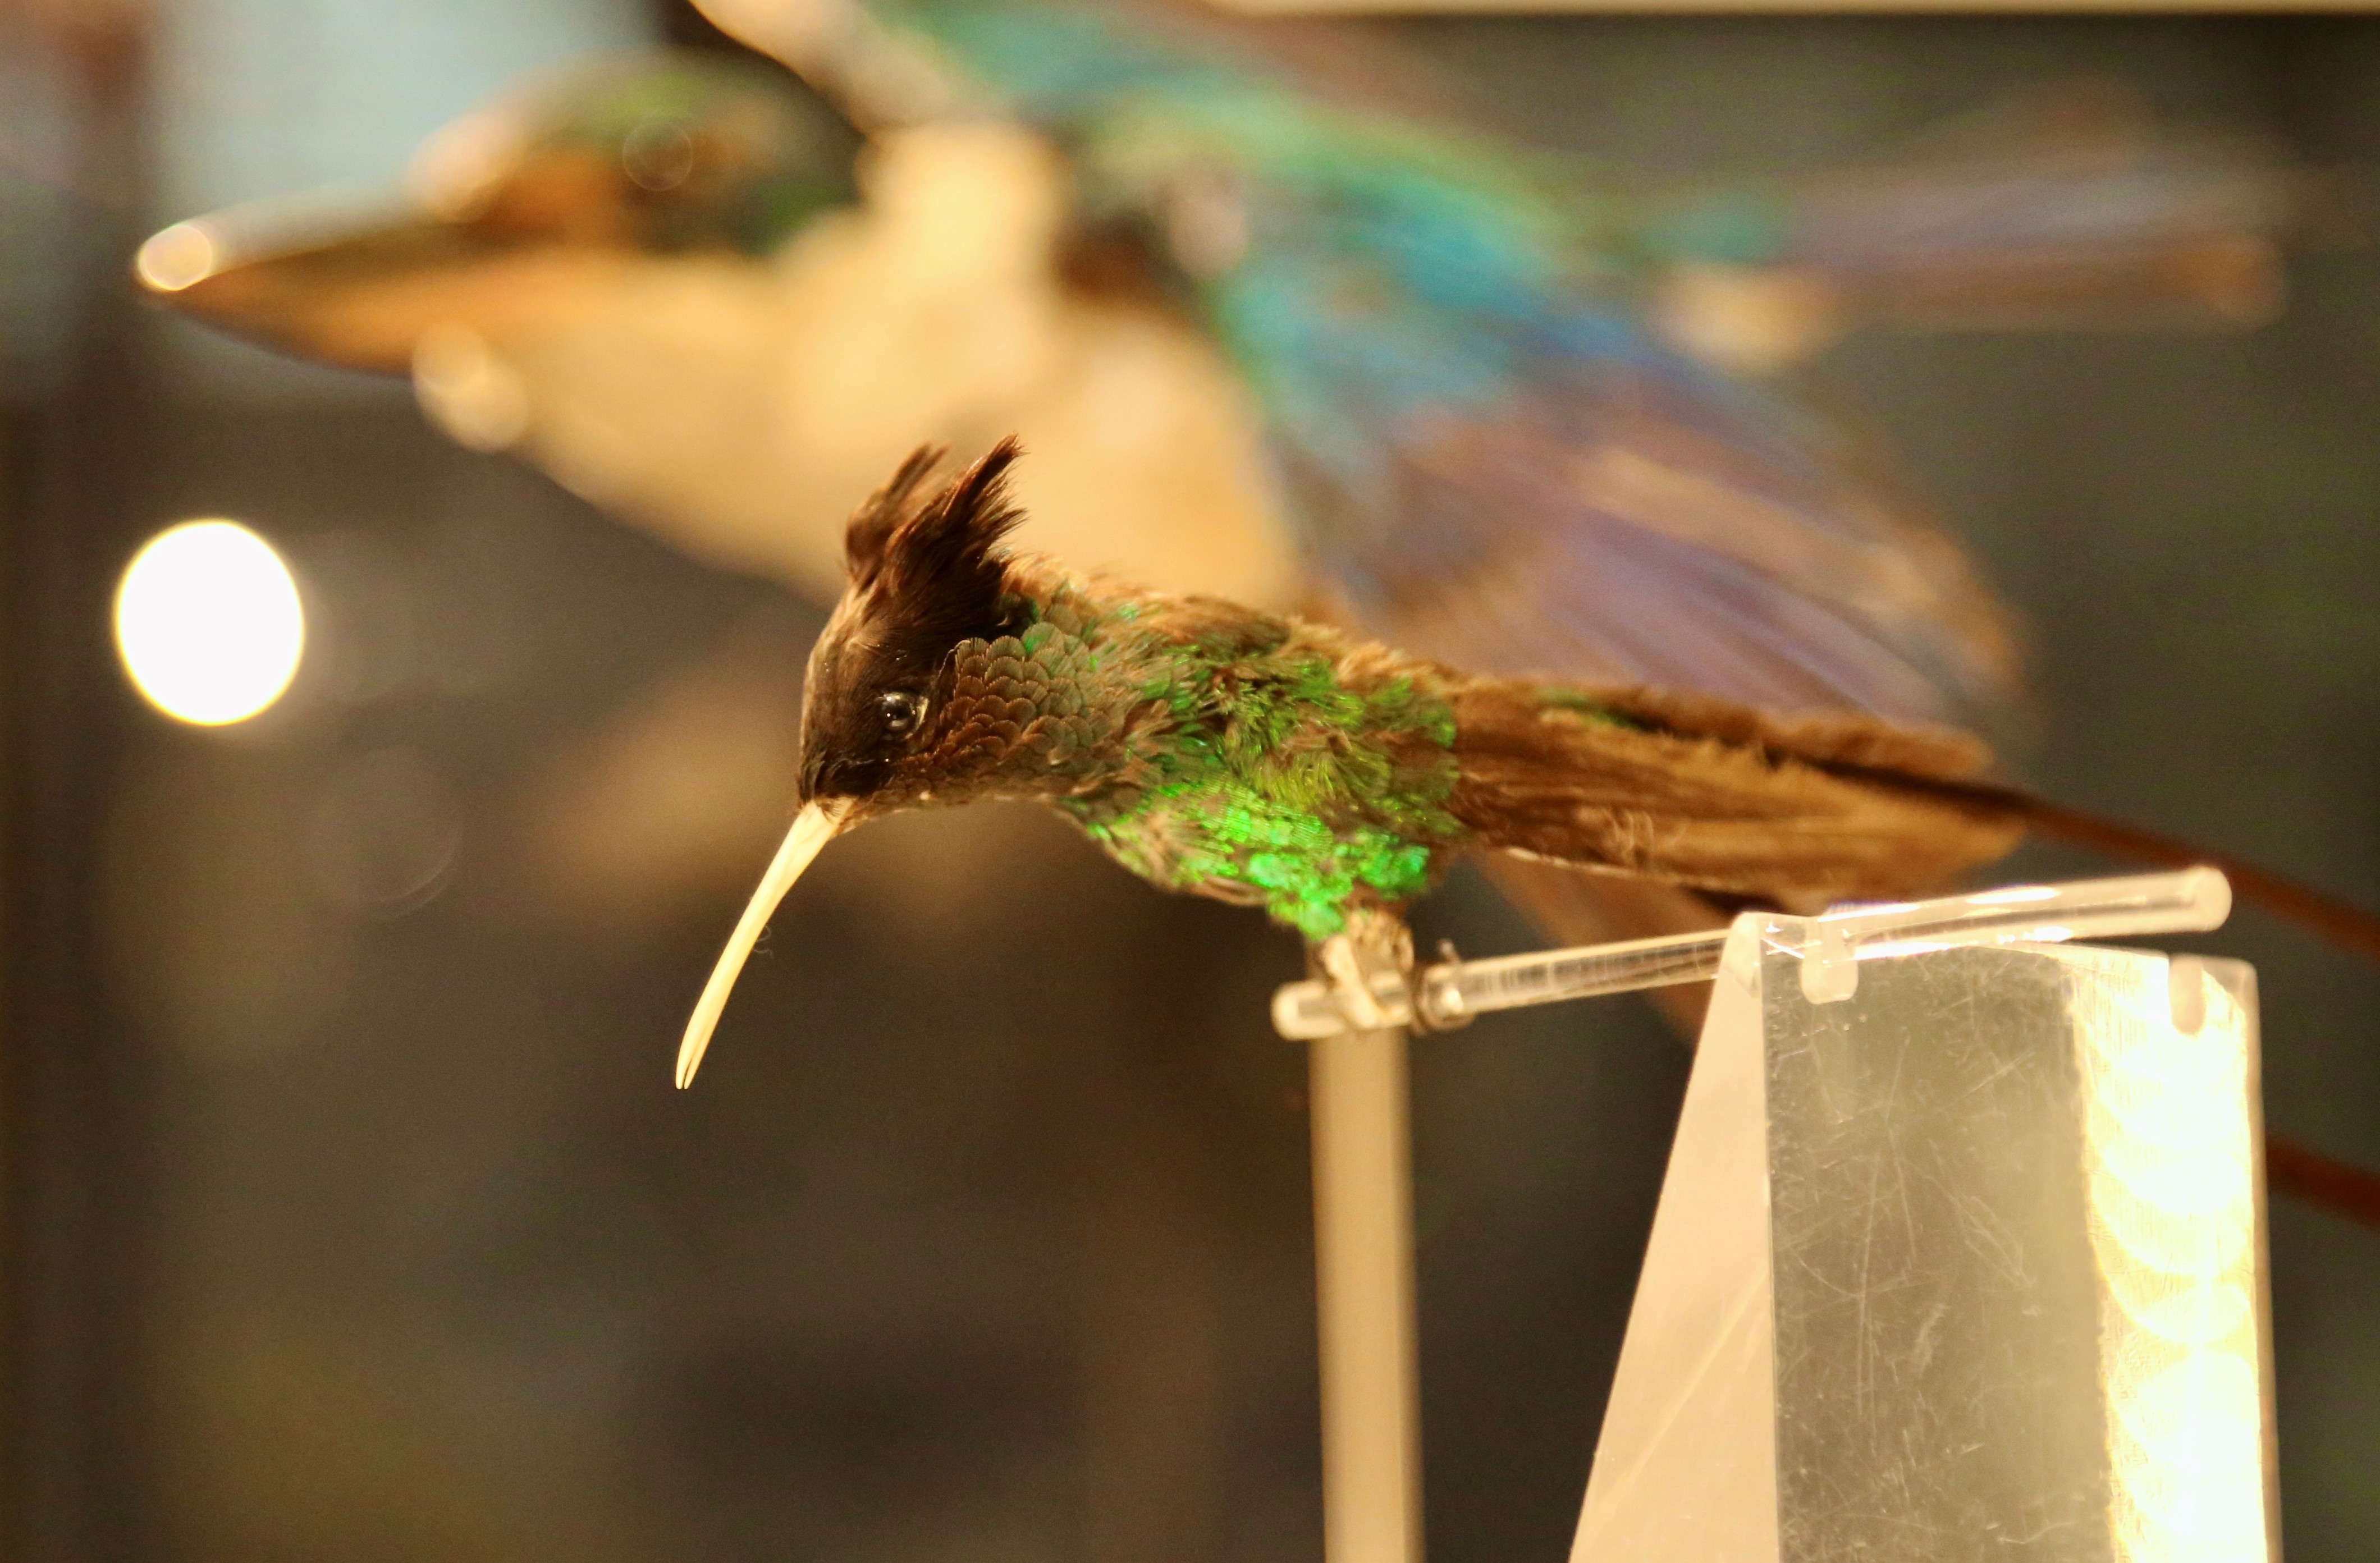 A taxidermy hummingbird that has been preserved by one of our Conservators